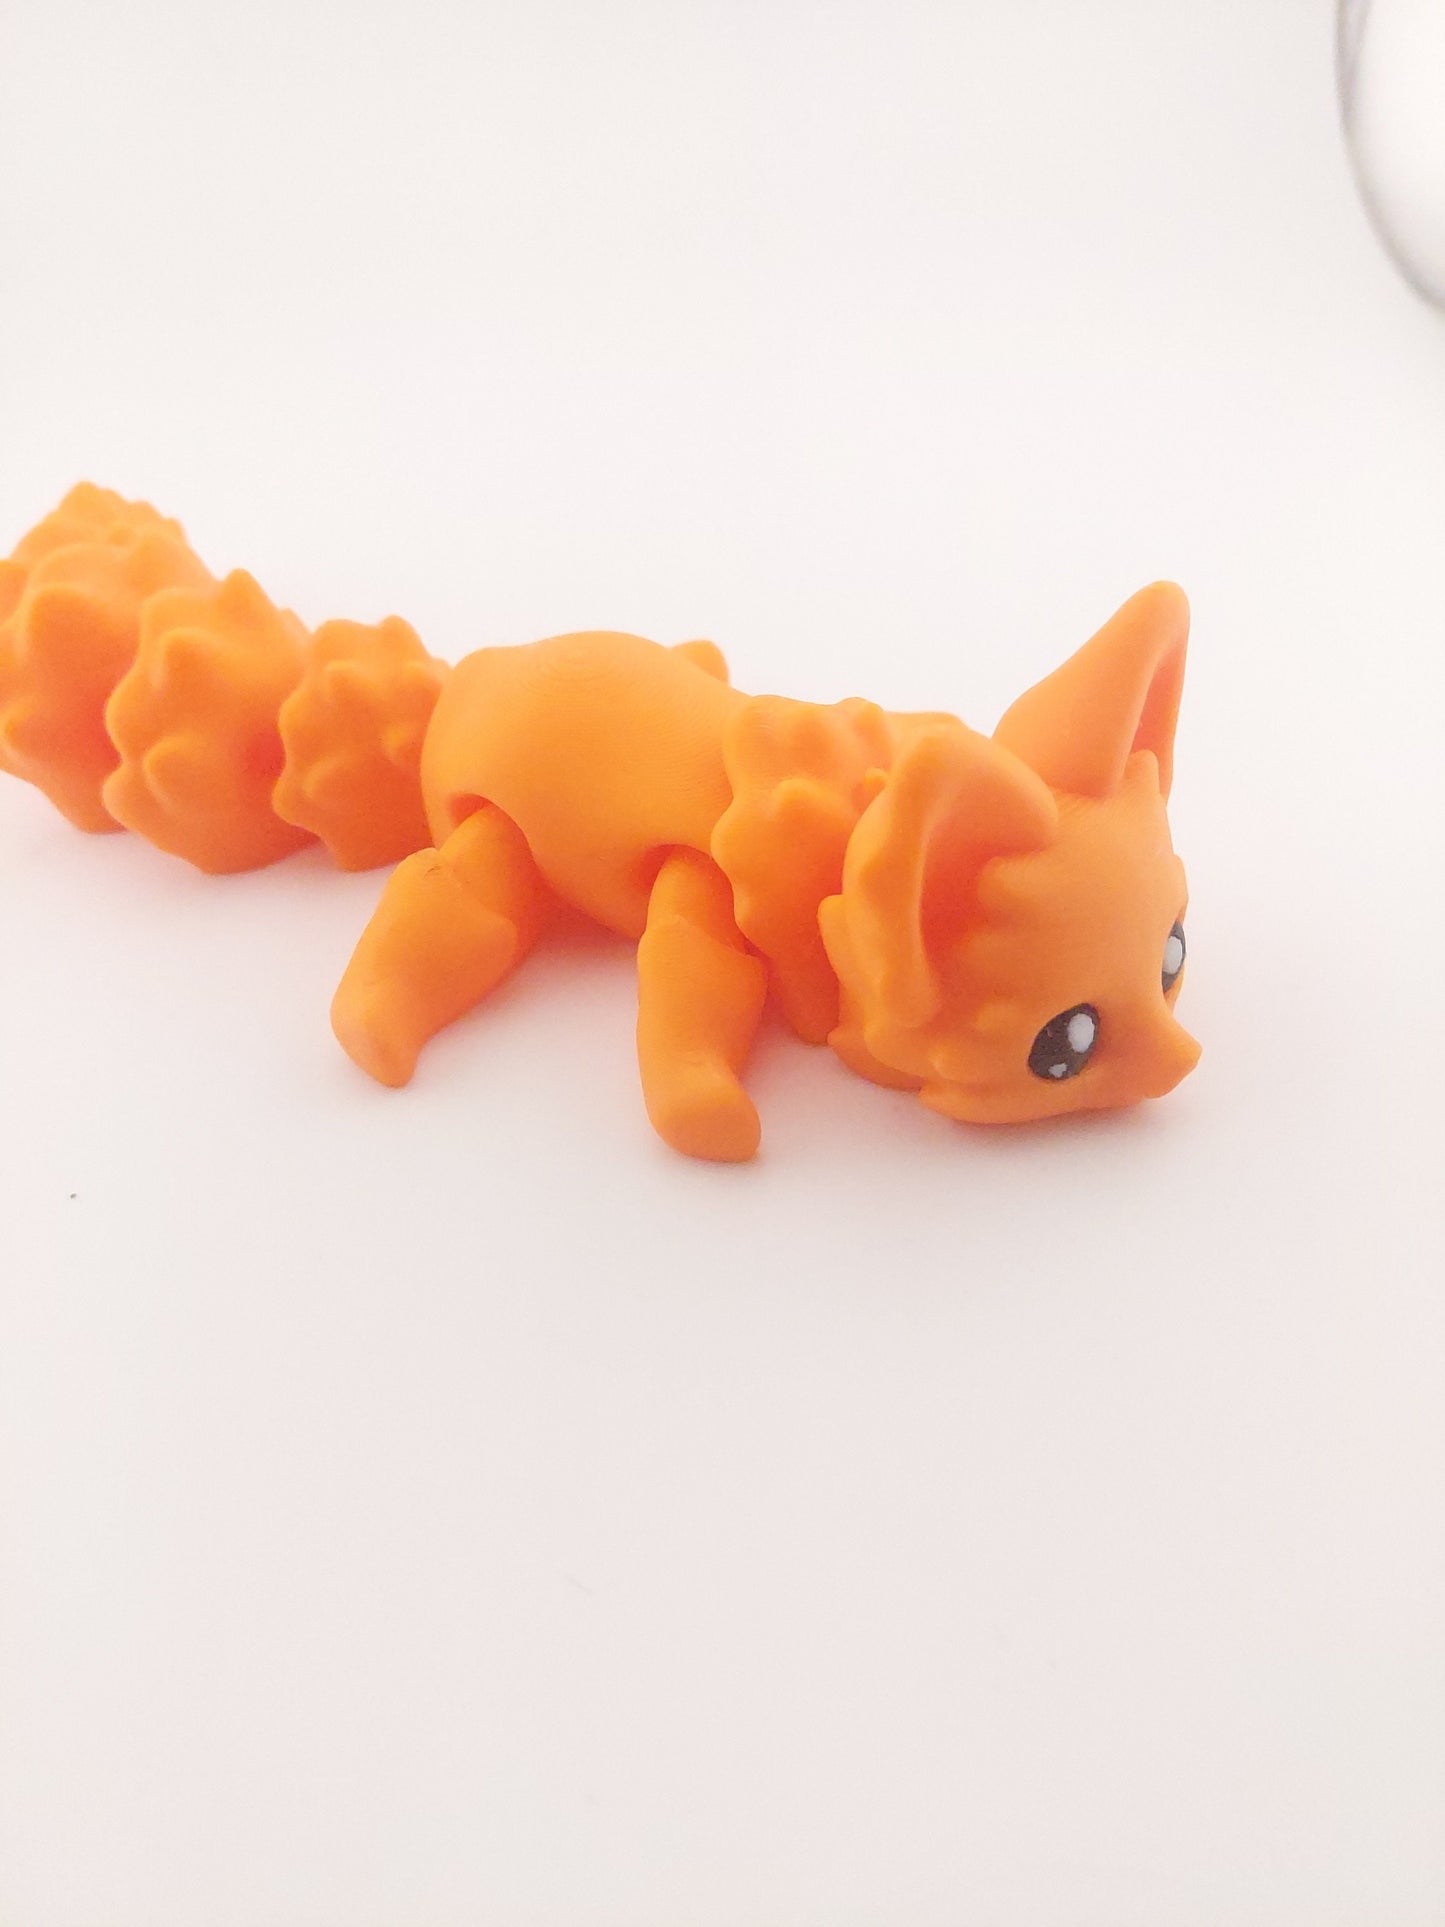 Articulated Cute Orange Flexi Fox 7.5 Inches - 3D Printed Fidget Fantasy - Authorized Seller - Articulated Desk Buddy